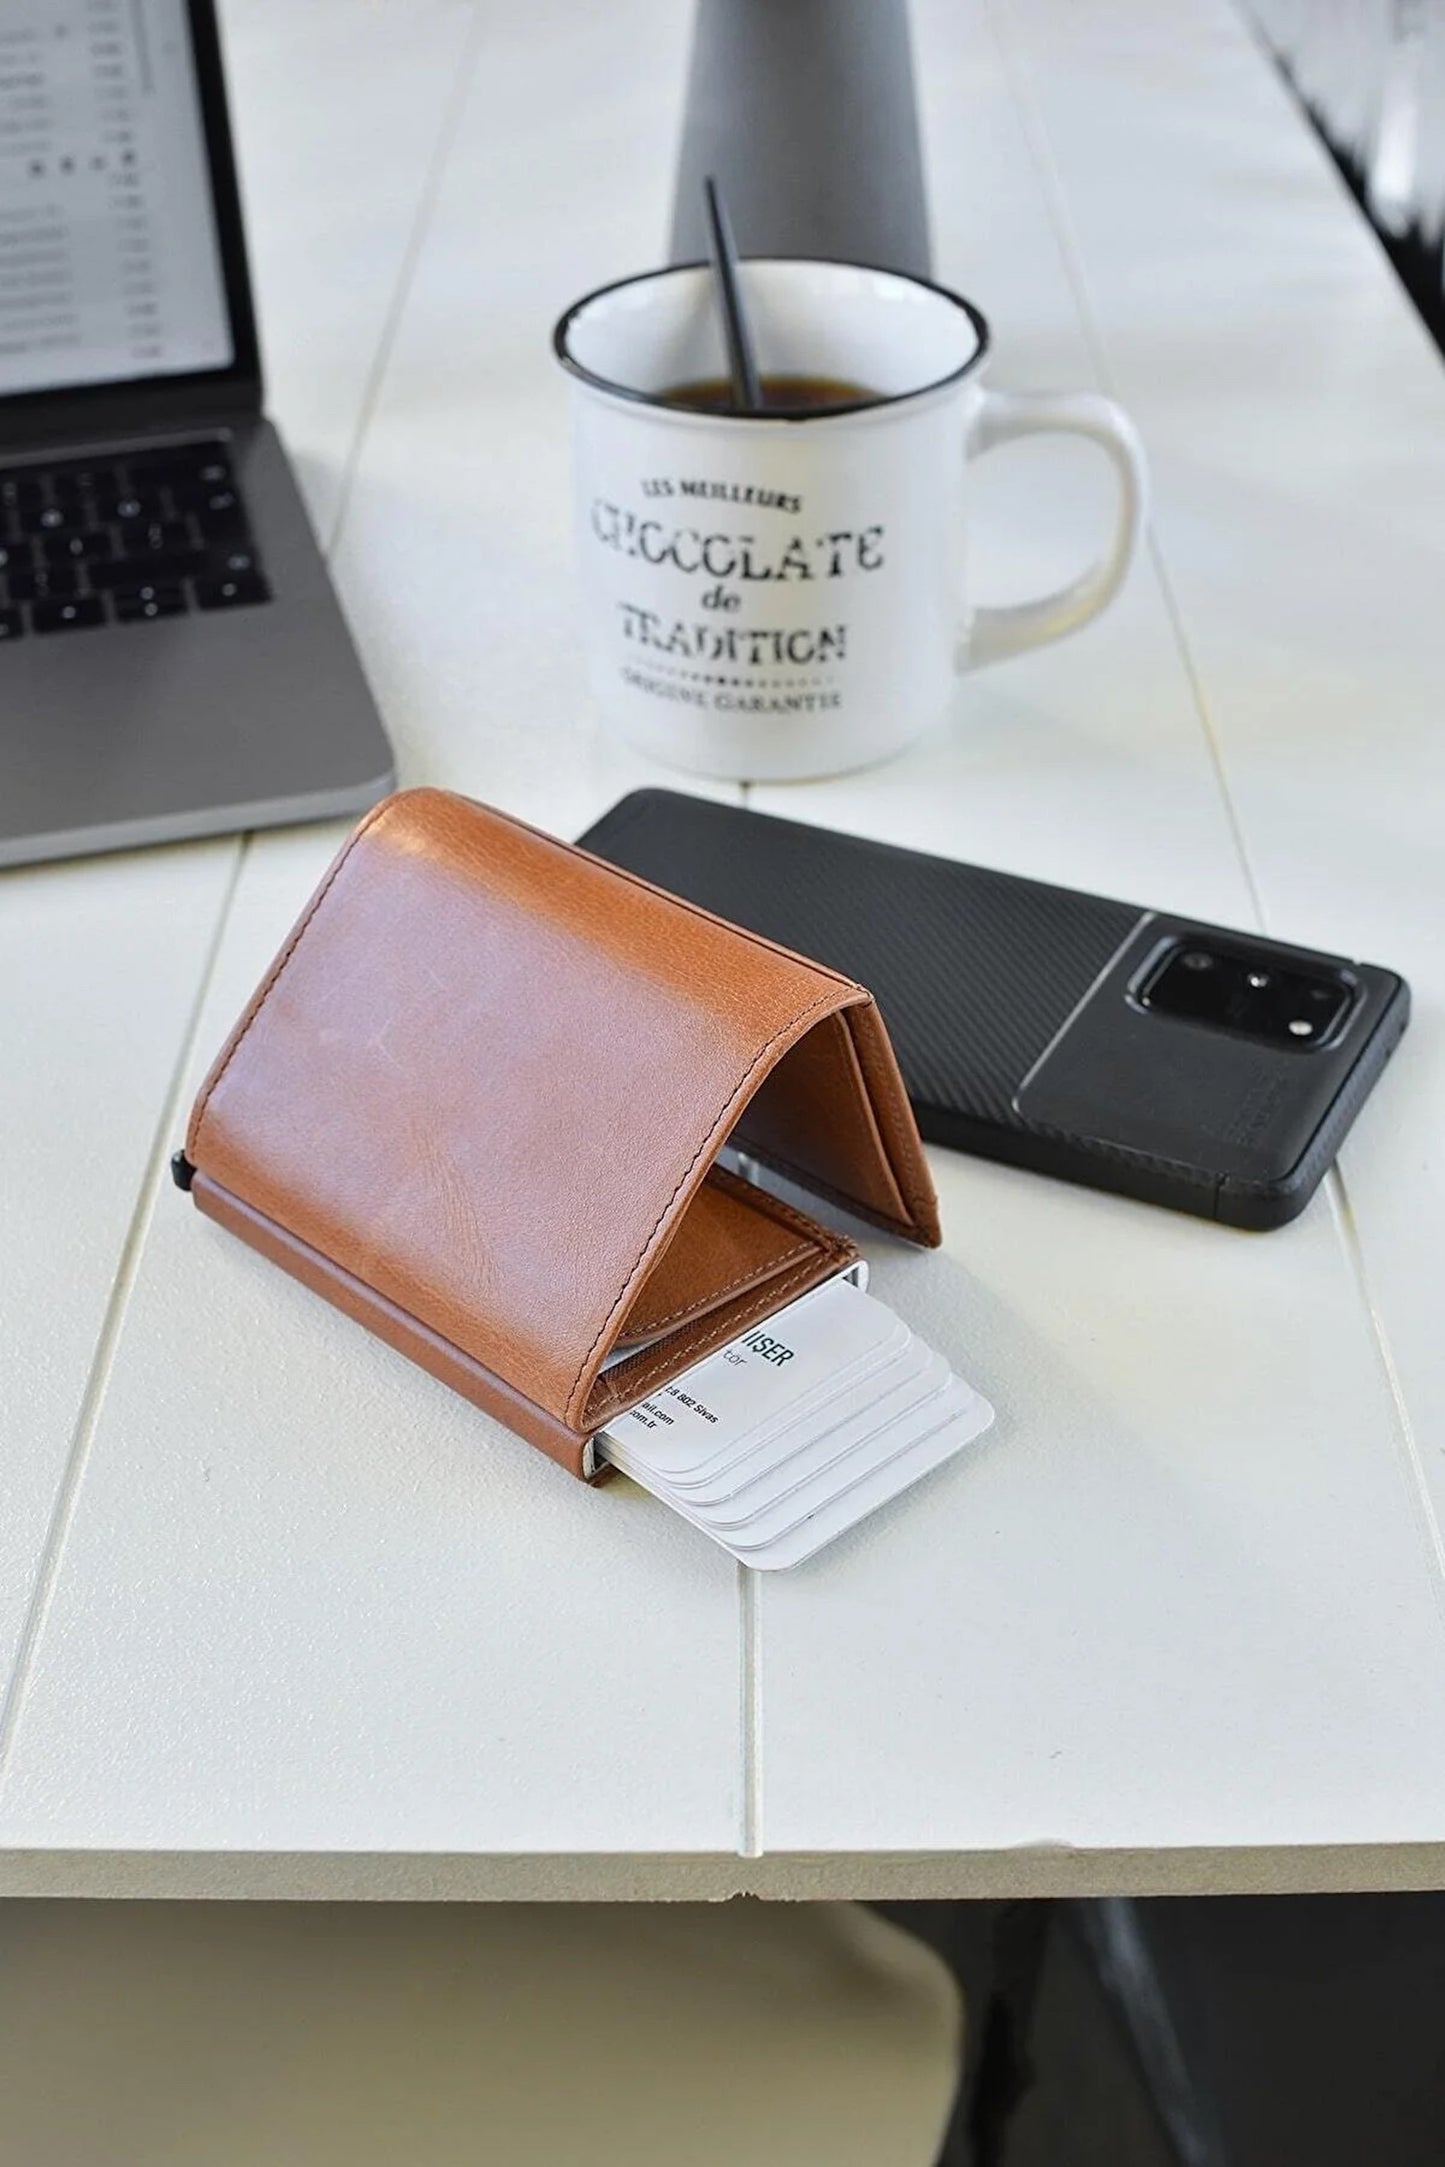 Leather Quick Card Access Trifold Wallet Tan